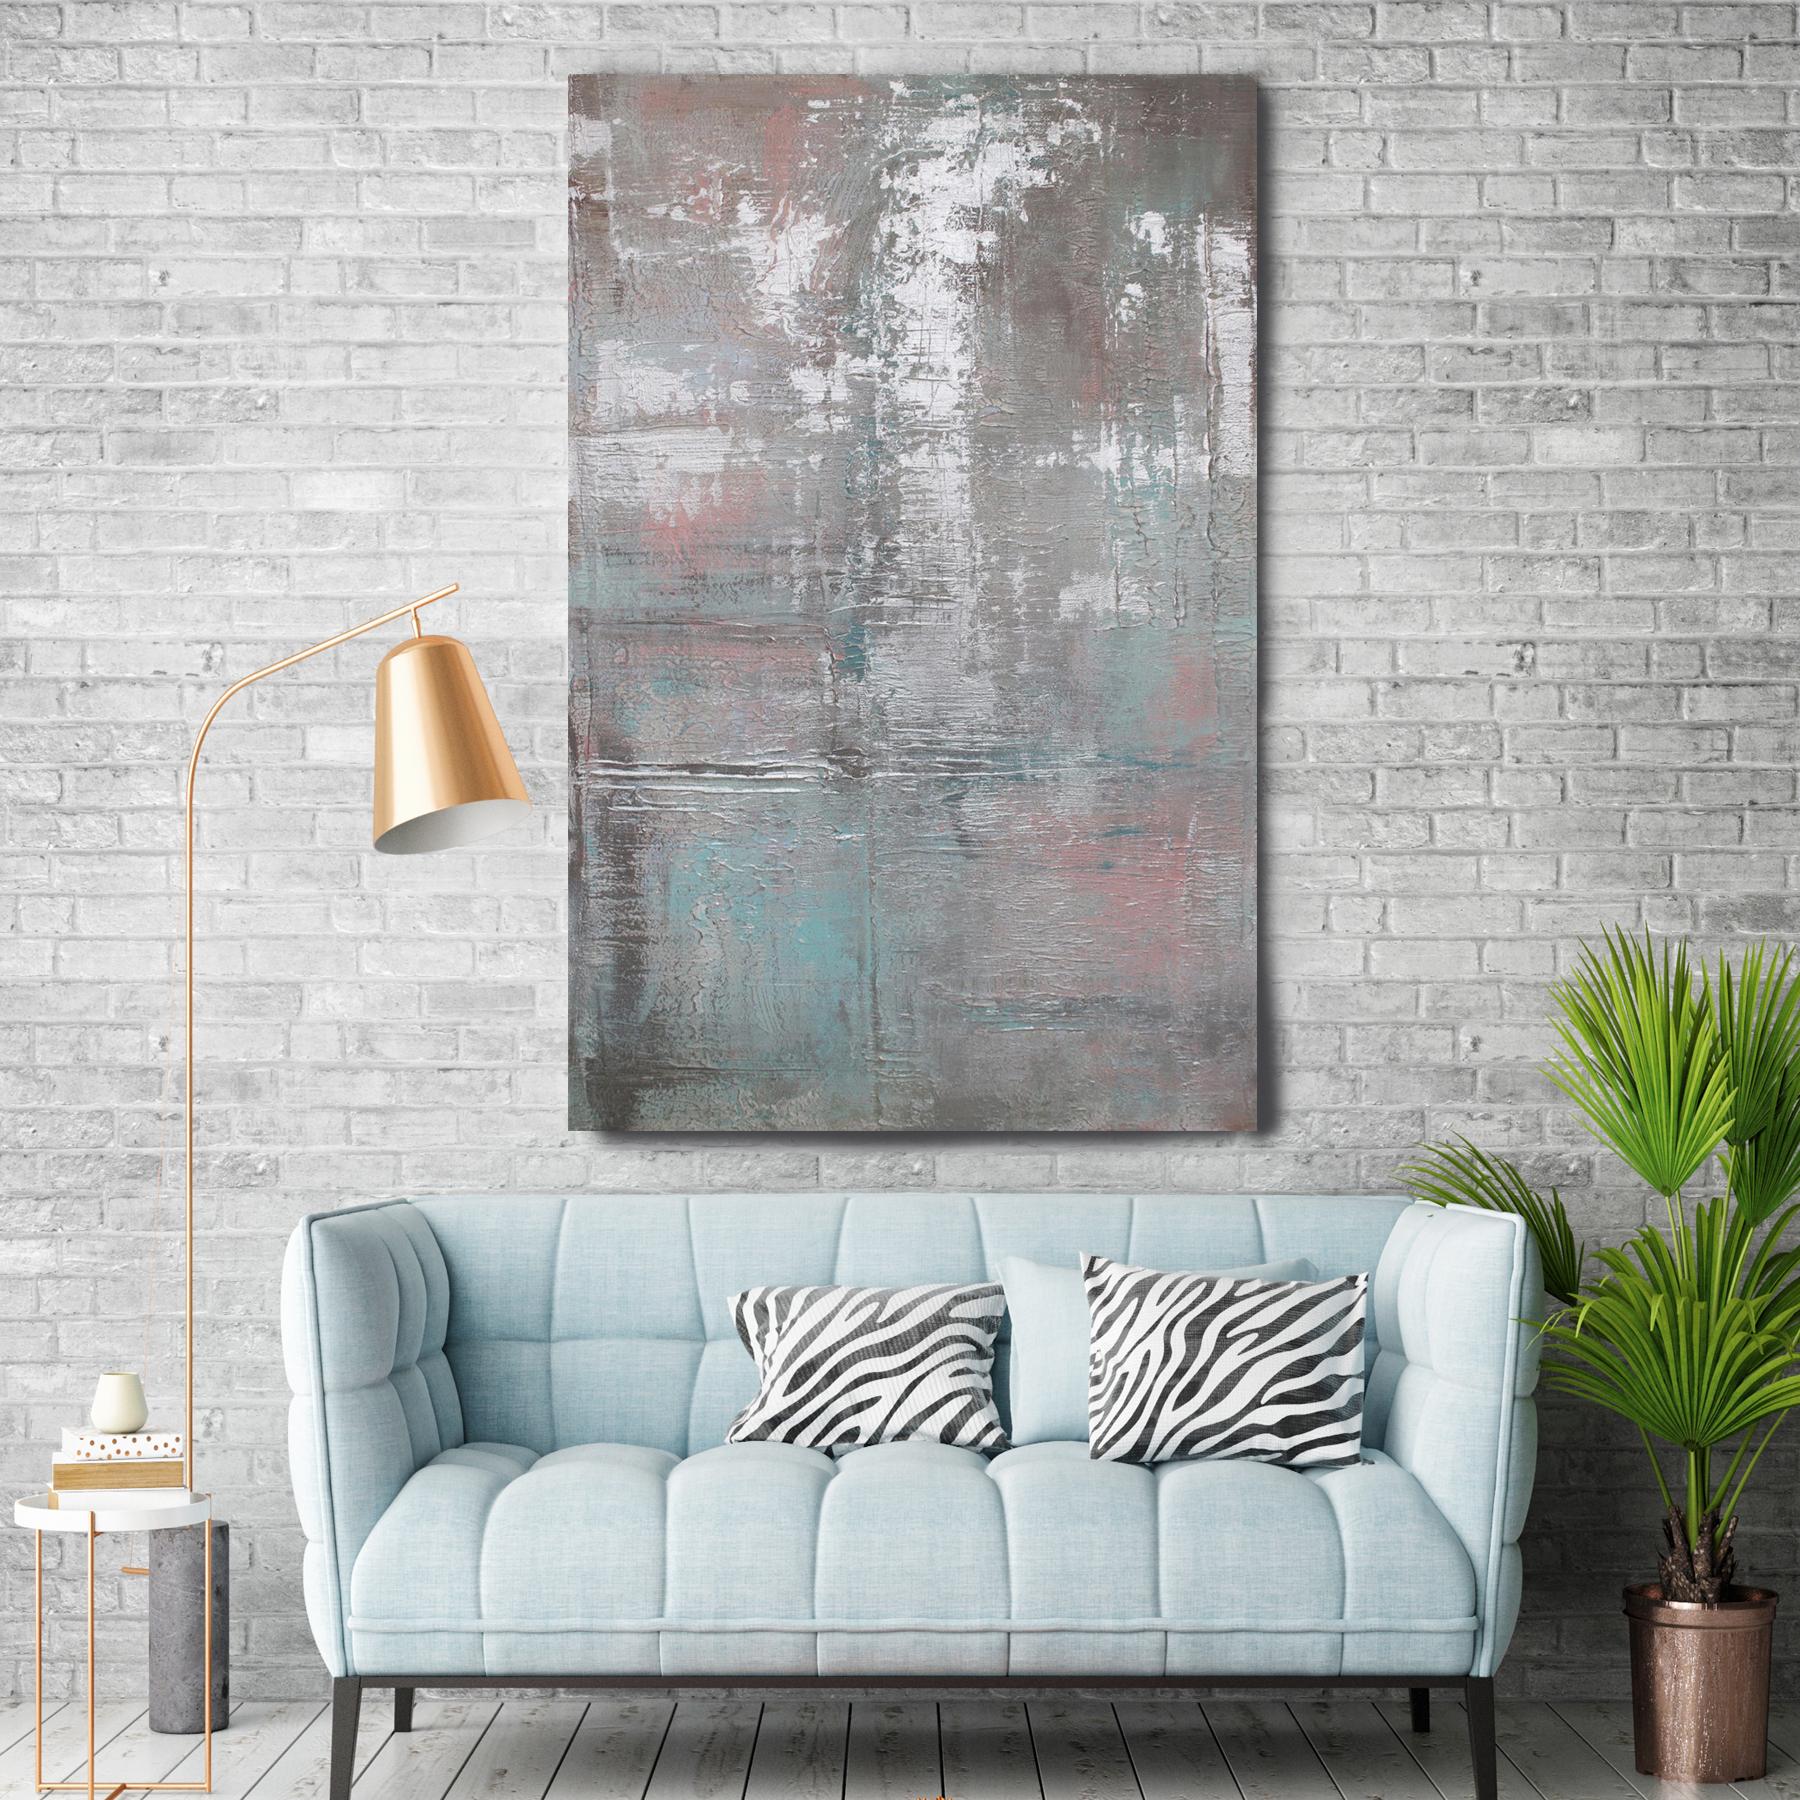 Irena Orlov Interior Painting - Silver Pink Contemporary Textured Mixed Medium on Canvas, Calm Water 30 x 48"